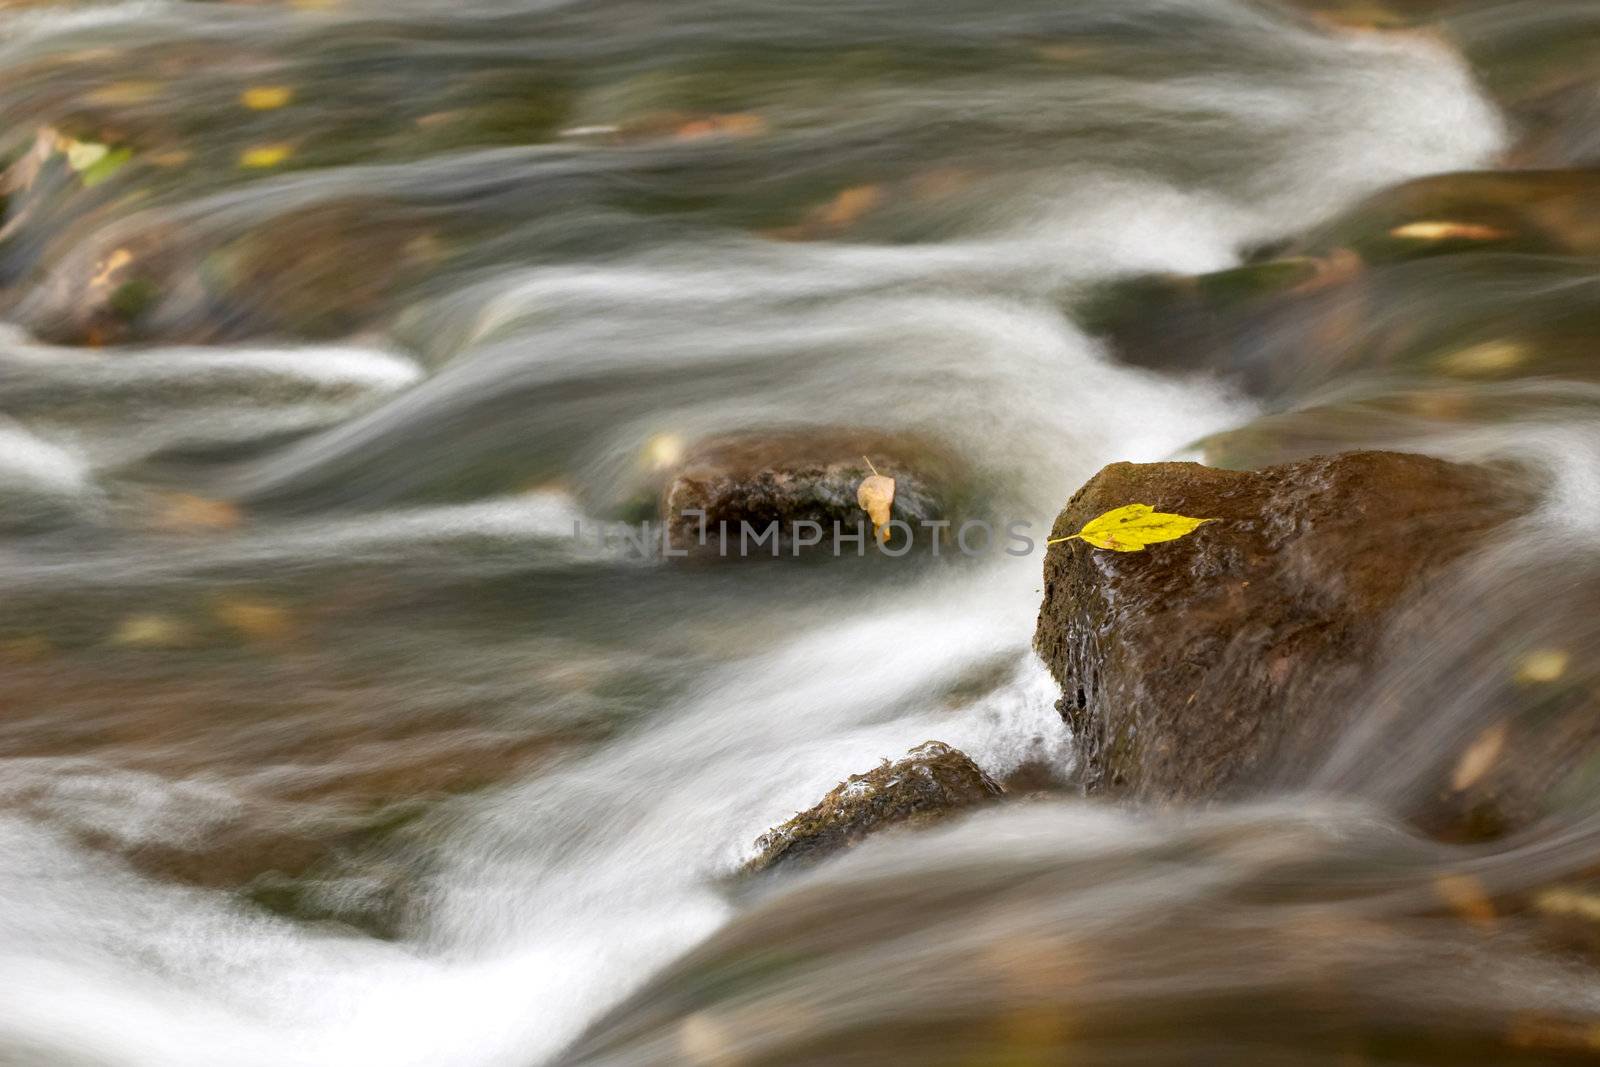 An image of leaves on a stone amongst a river